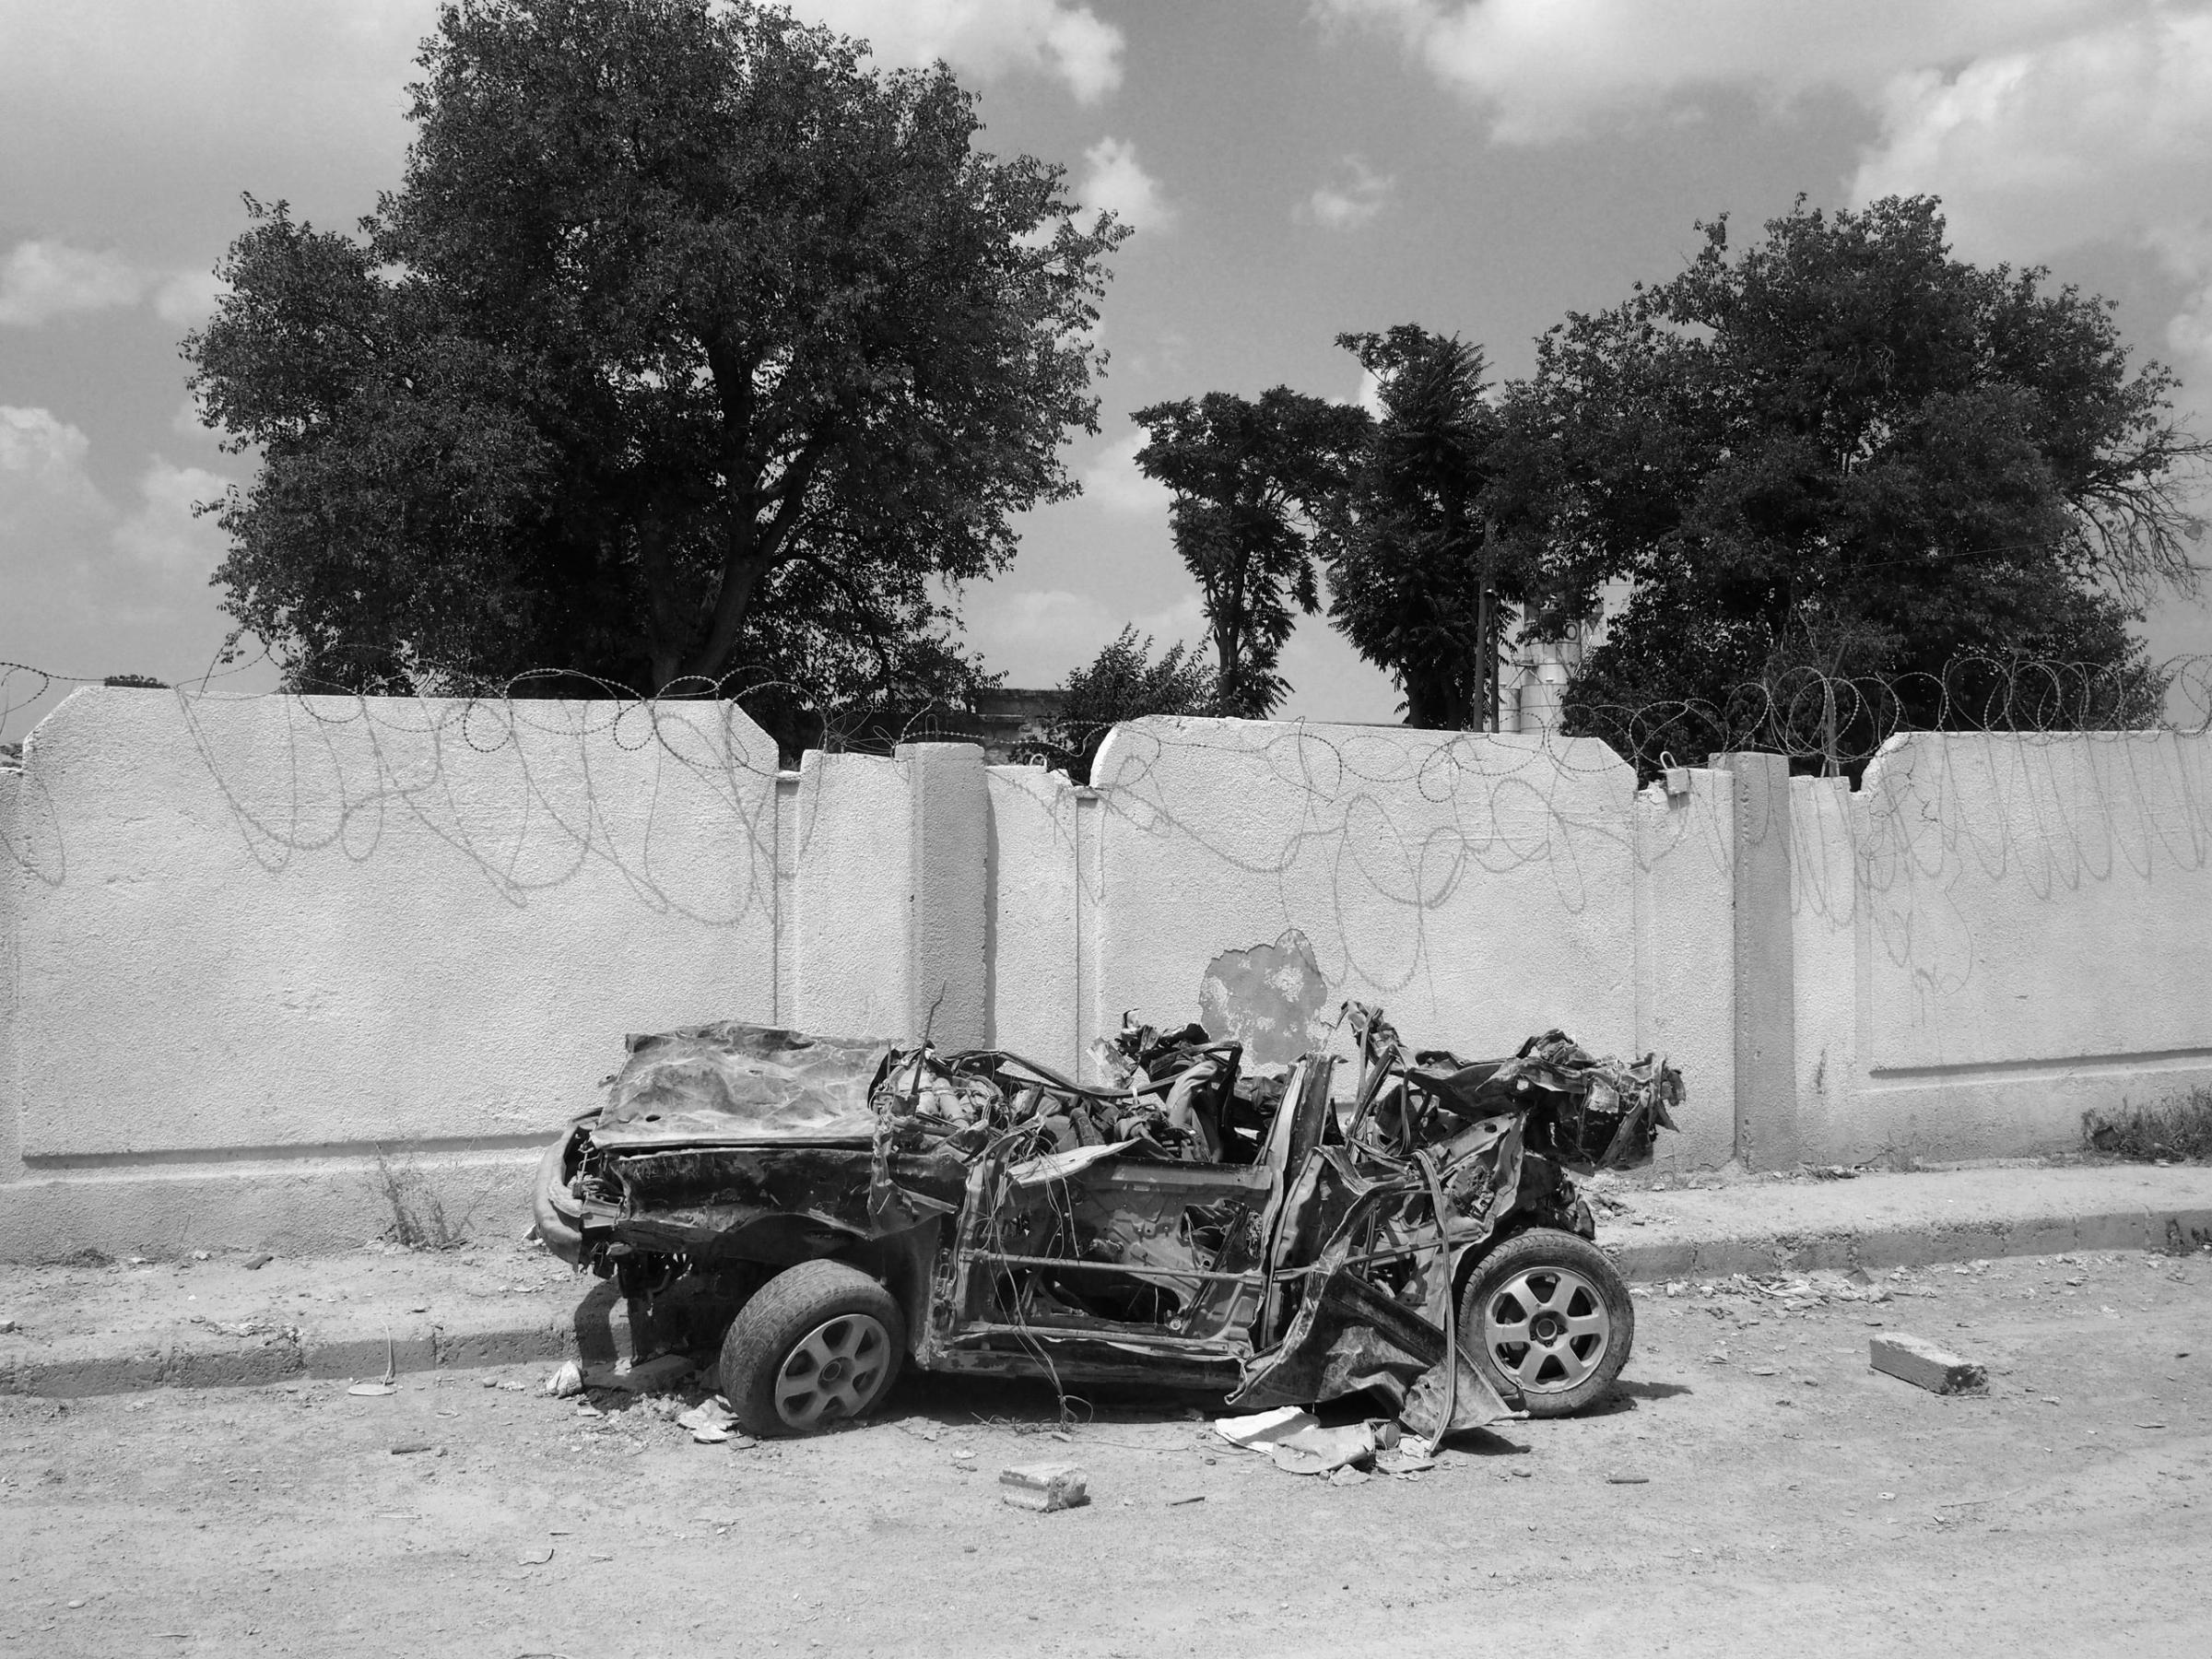 Kobane, Syria. August 8, 2015.A car damaged during the fighting in the Kurdish-held city of Kobane. In January 2015, the YPG backed by coalition airstrikes succeeded in expelling the Islamic State (IS) from the town. Seventy percent of the city was destroyed by airstrikes and fighting. The YPG now controls the town, which has mostly been reduced to rubble.(Photo by Moises Saman/MAGNUM)